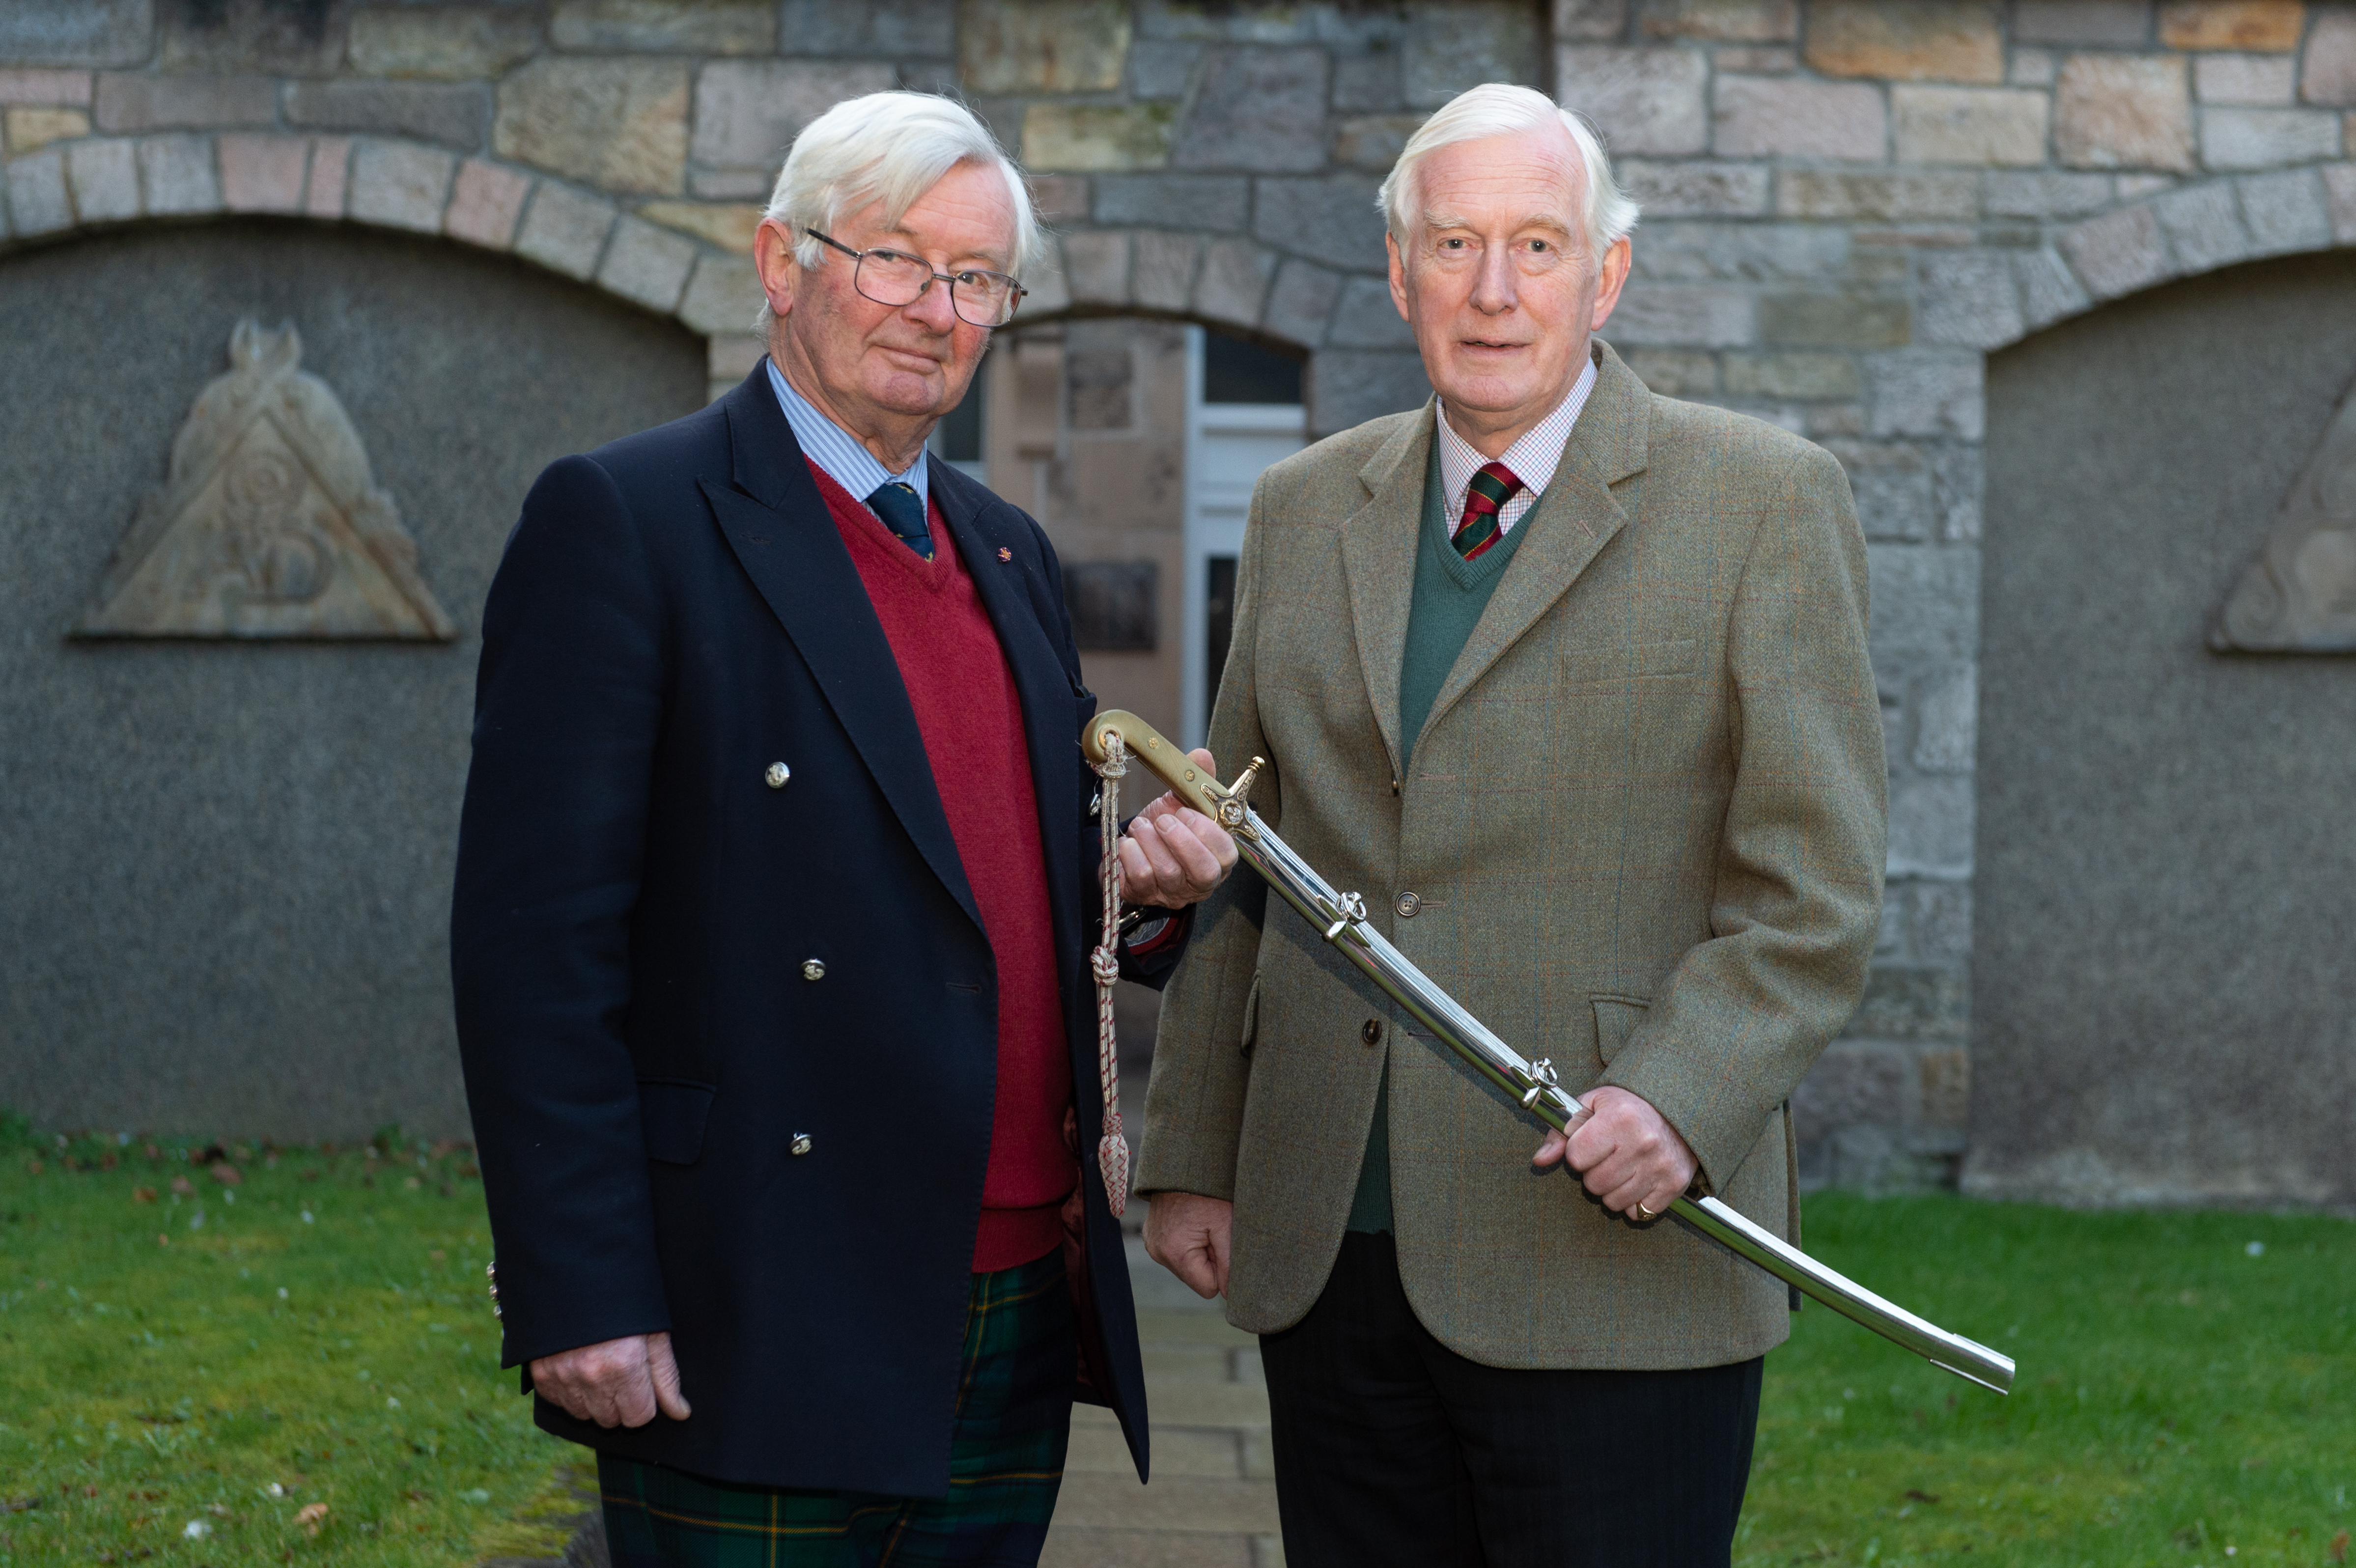 Former lord lieutenant Grenville Johnston passes the sword of office to new appointee Seymour Monro.